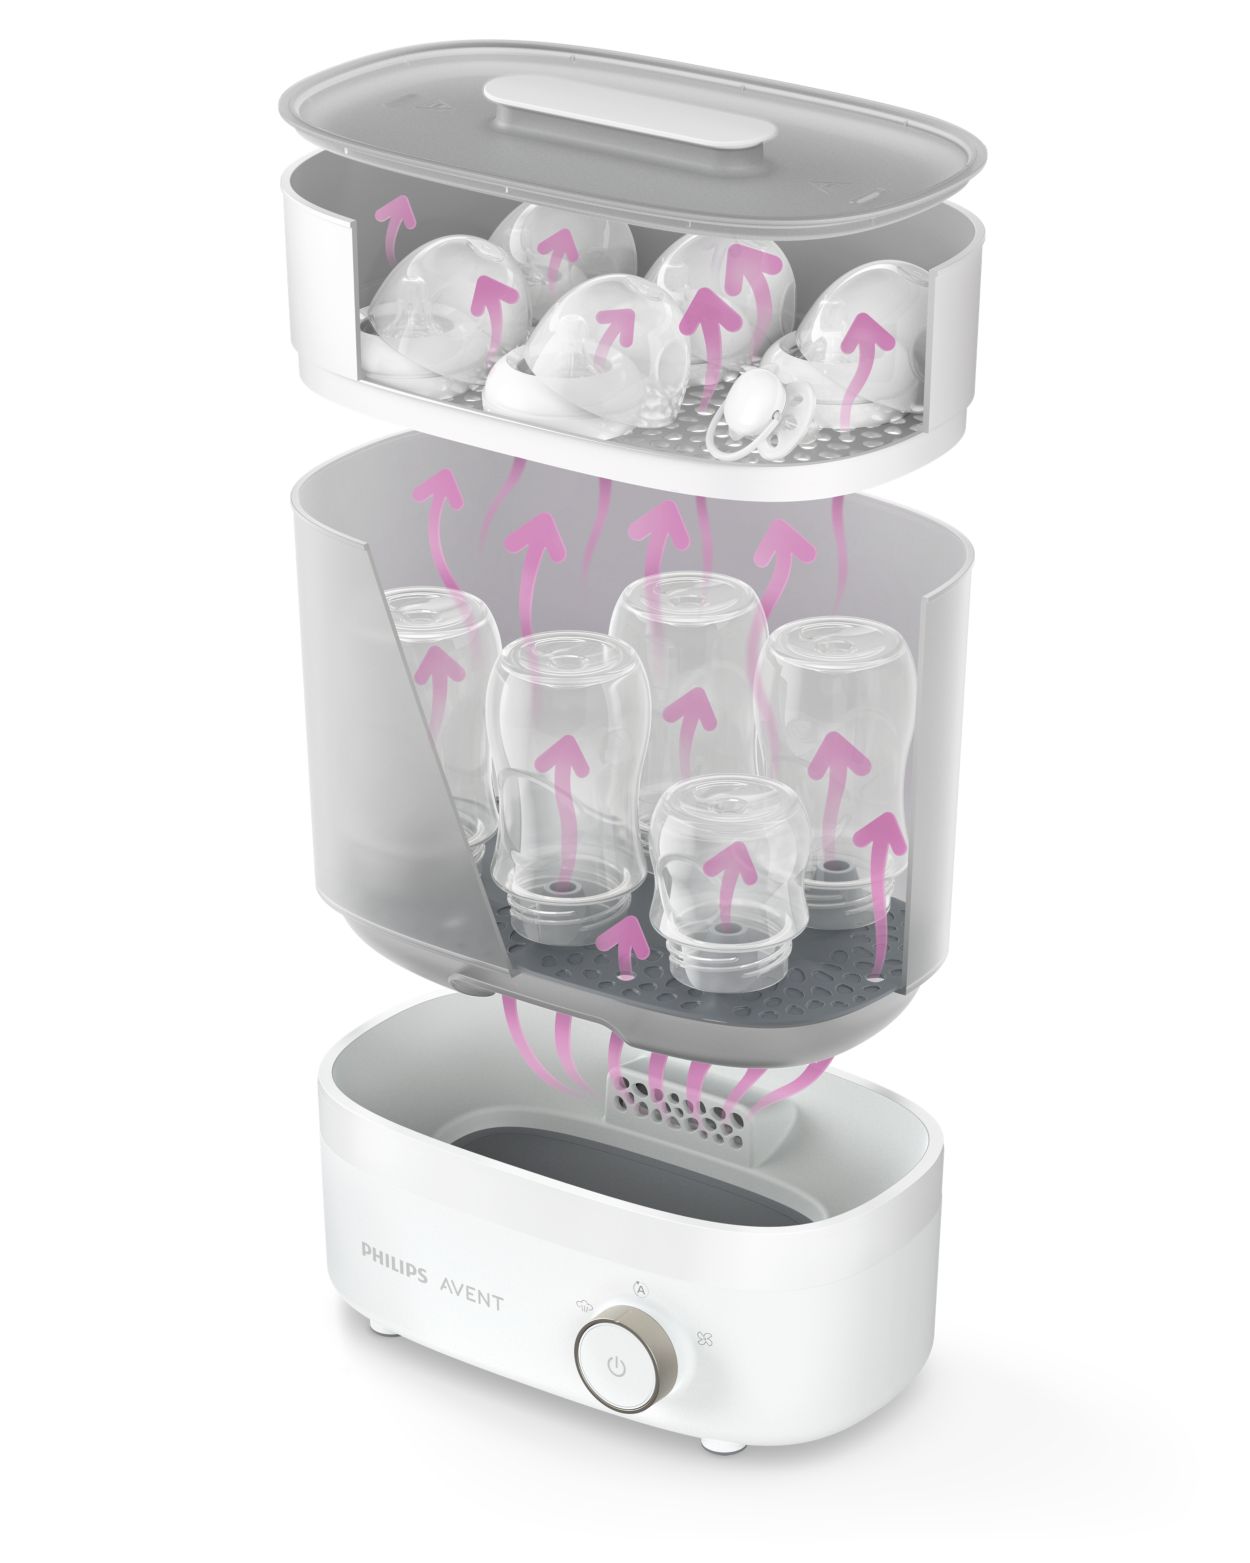 Philips Avent Premium Electric Steam Sterilizer With Dryer : Target